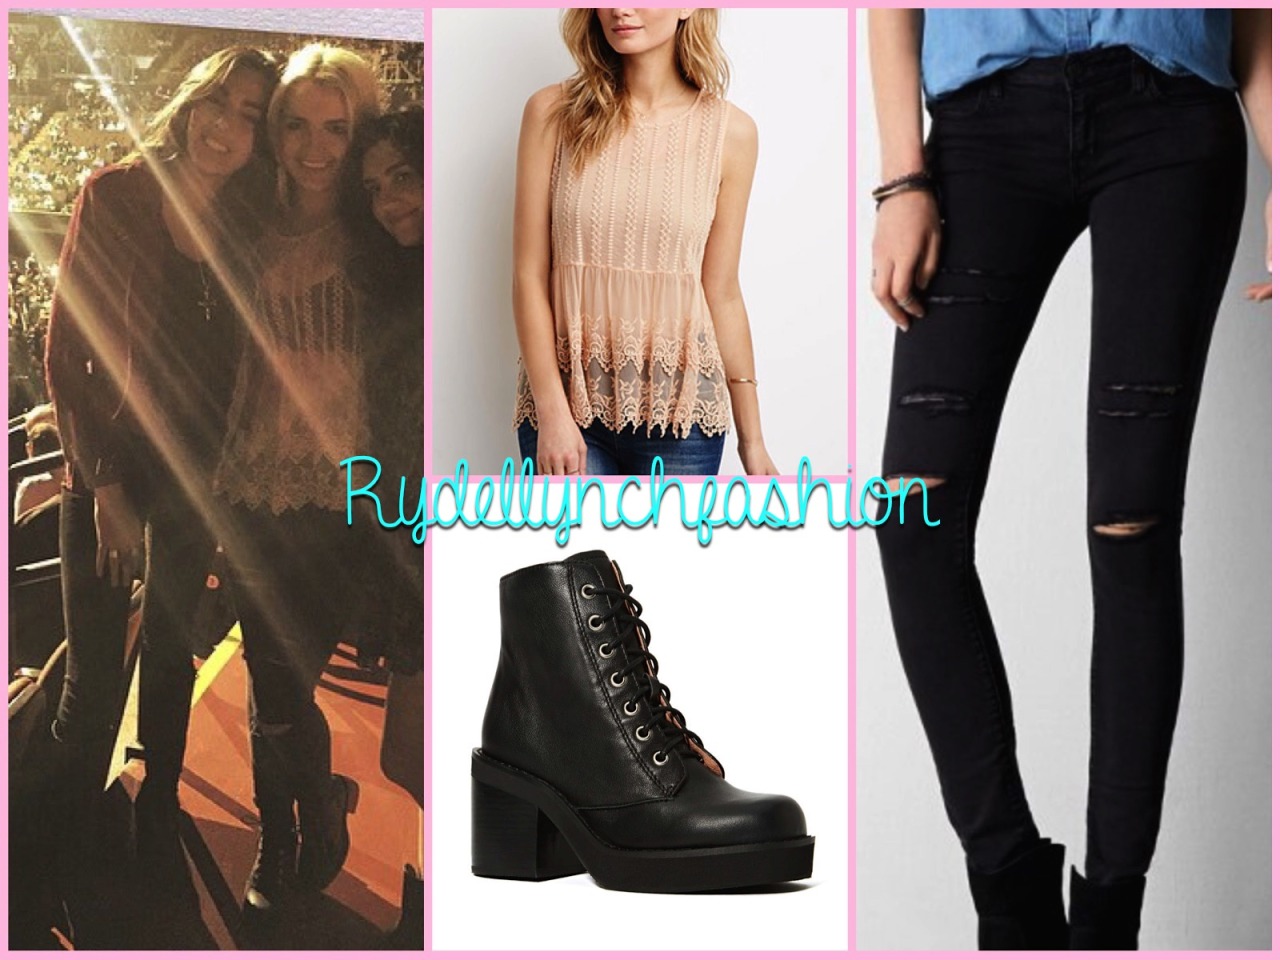 Rydel’s Outfit for the U2 Concert;
• Eyelet Mesh Layered Top (Exact) - No Longer Available
• Jegging (Exact) - Price: $44.99
• Jeffrey Campbell Tristan Boot (Exact) - Price:$185.00
May 27, 2015